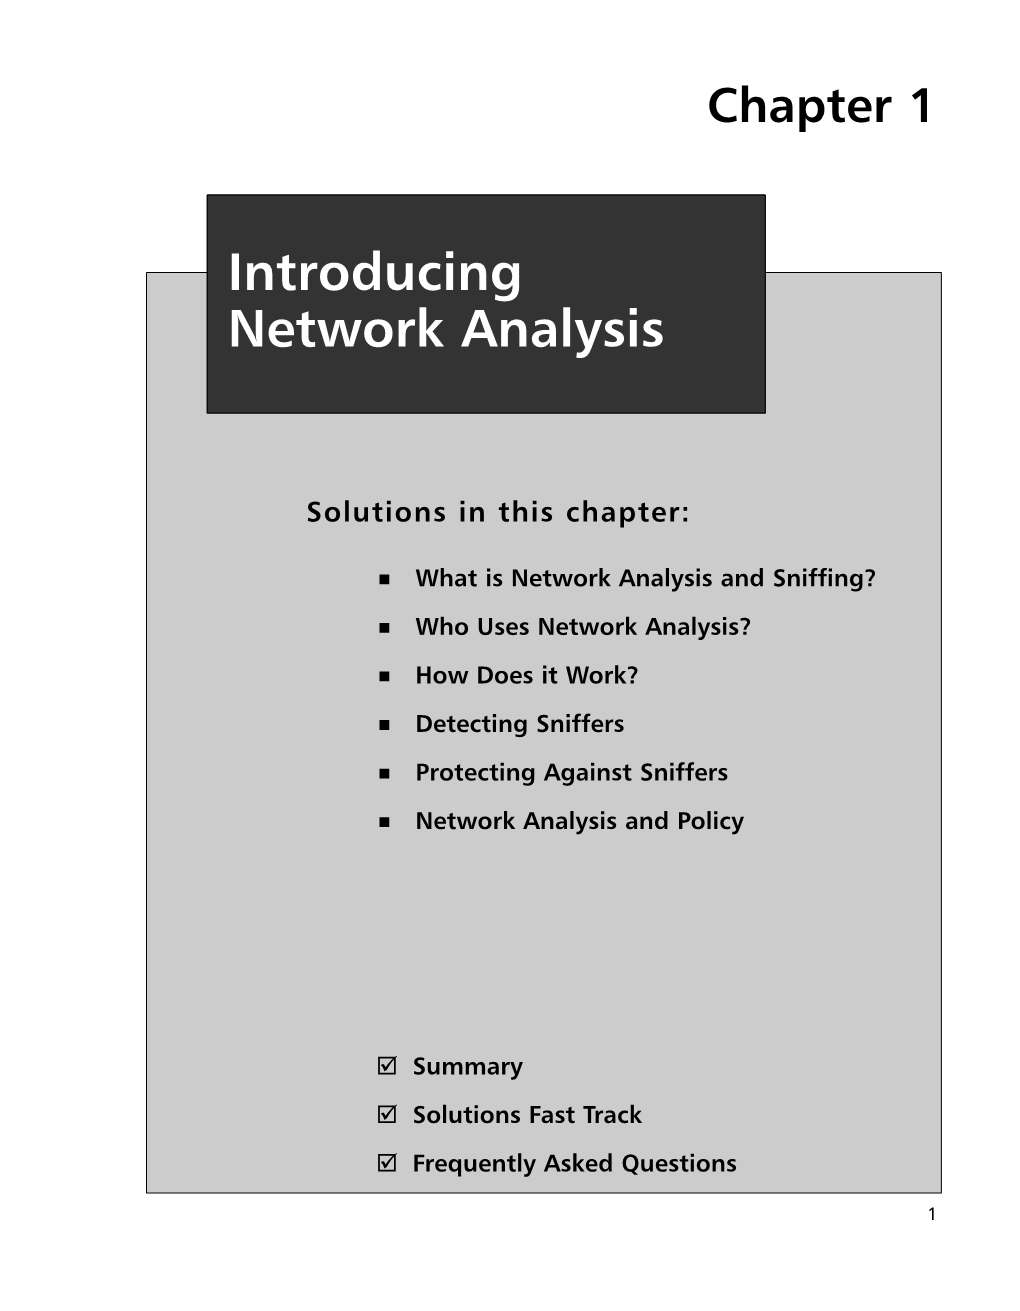 Introducing Network Analysis